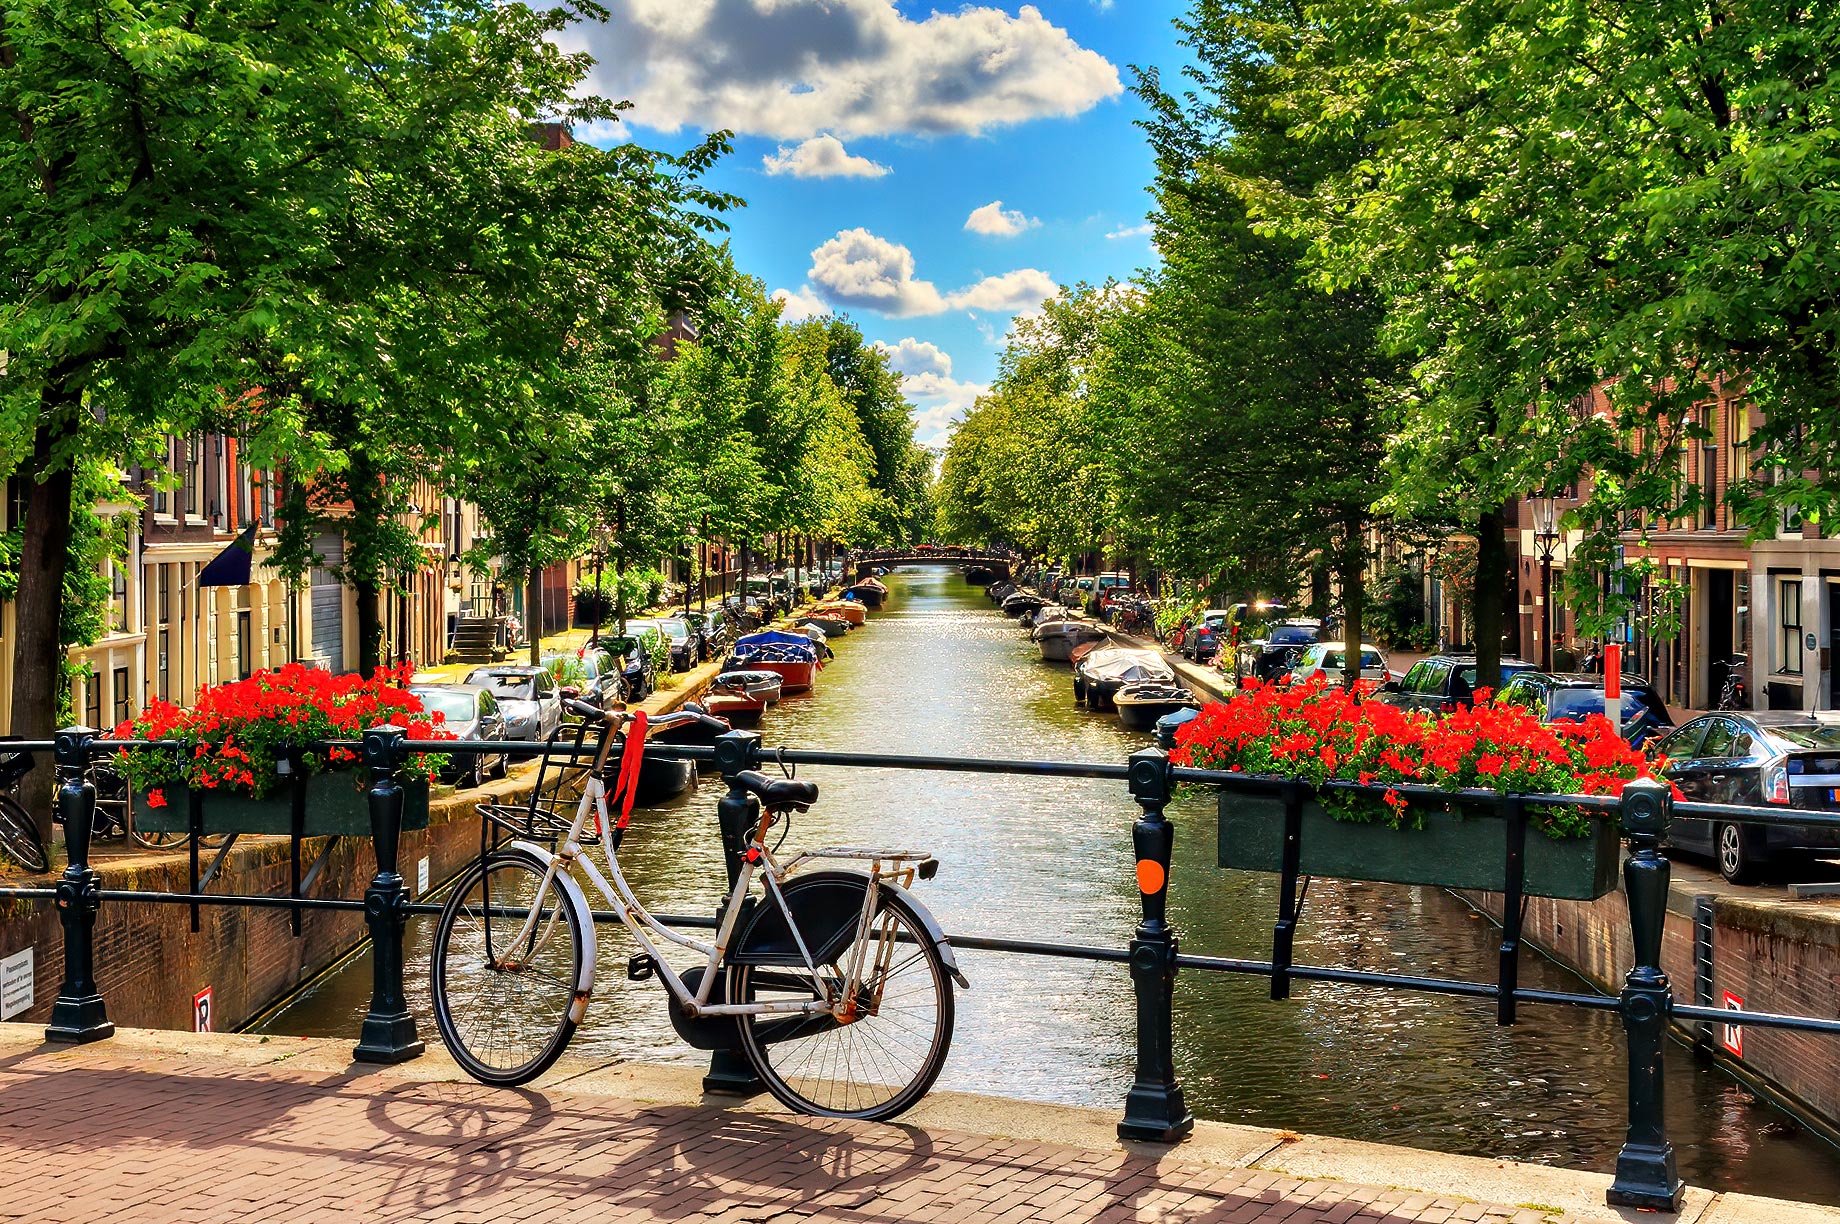 Amsterdam, Netherlands: A City of Canals and Culture